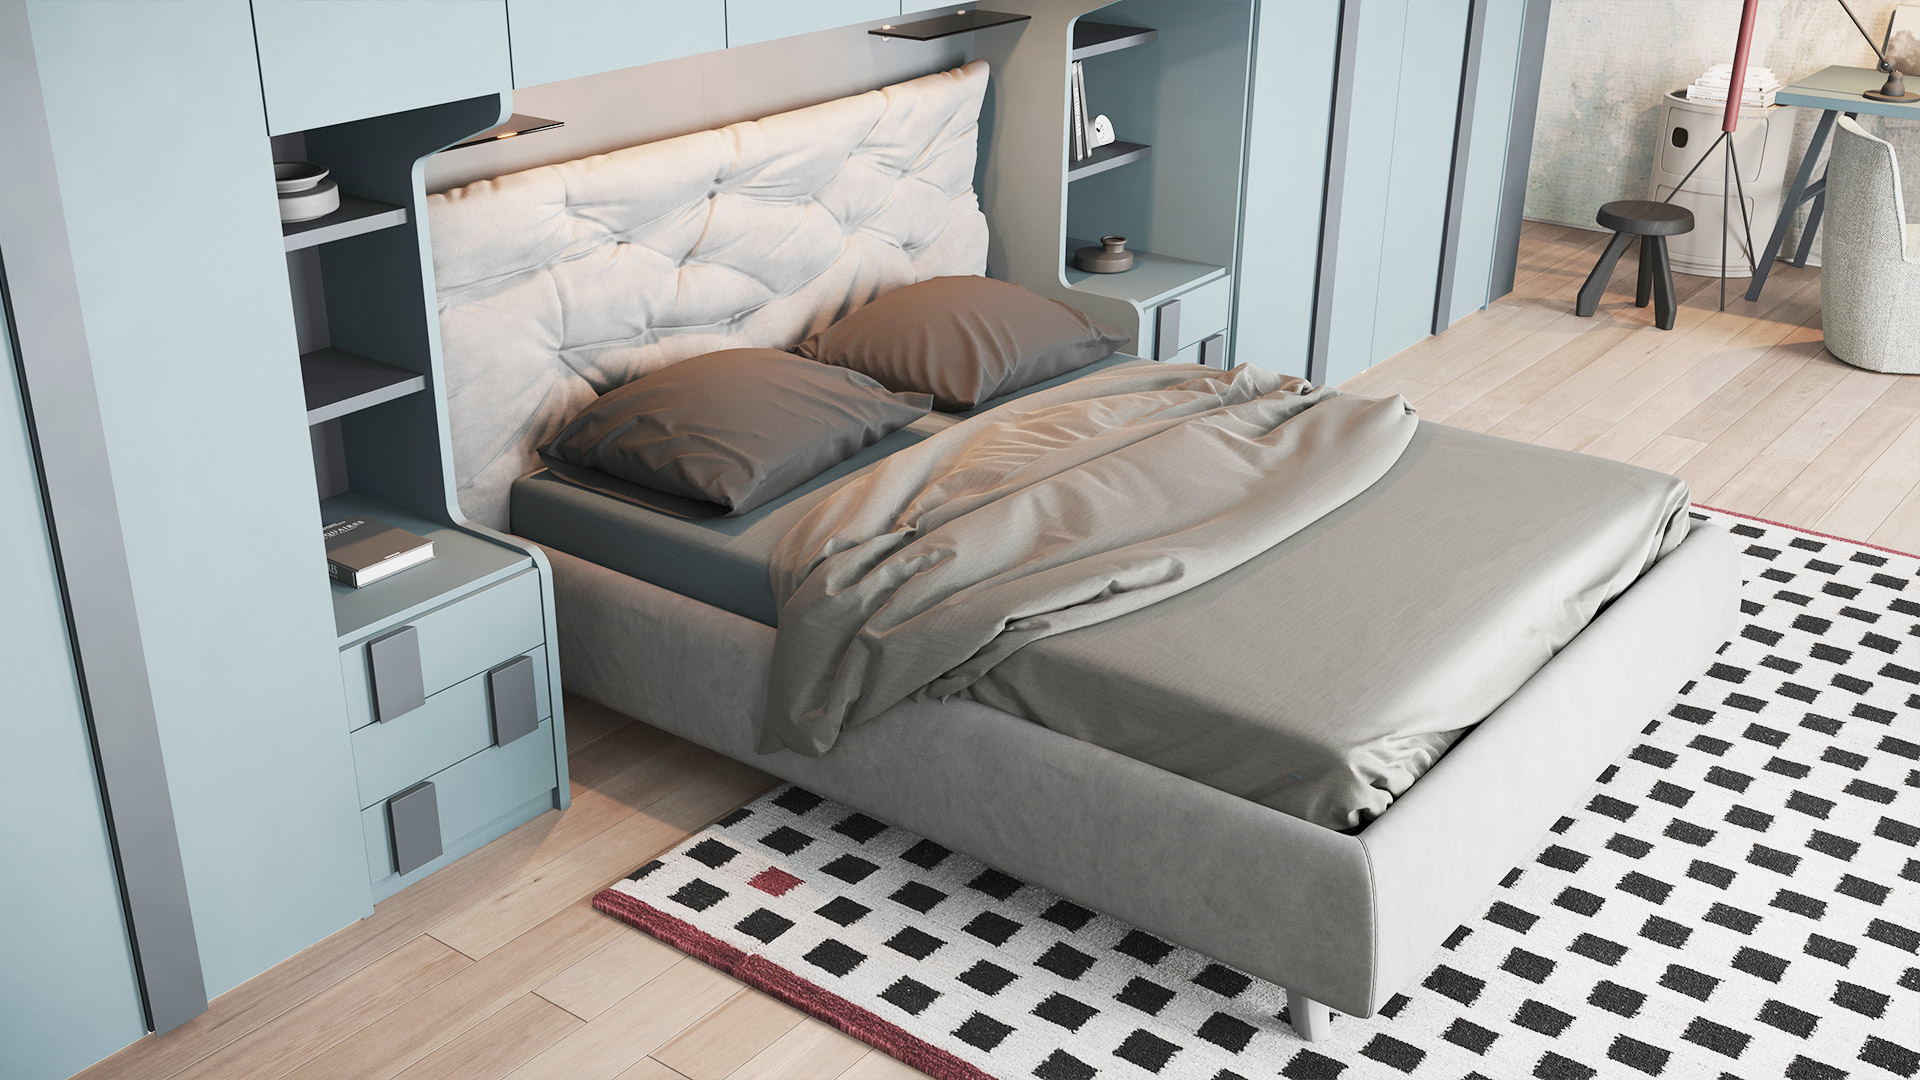 Container bed: the functional solution for the sleeping area